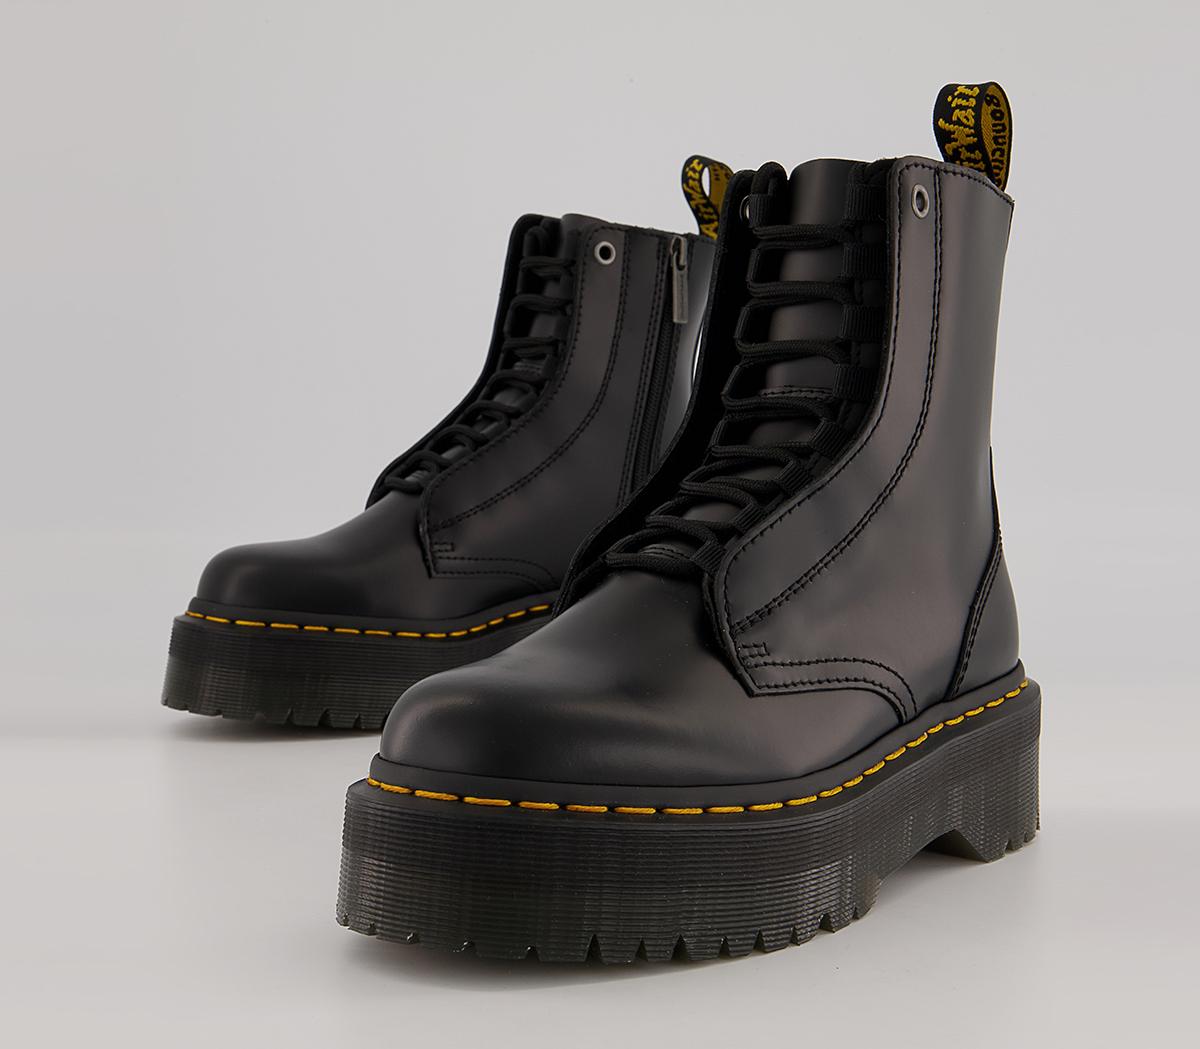 Dr. Martens Jarrick 8 Tie Boots Black Smooth - New Season Boots